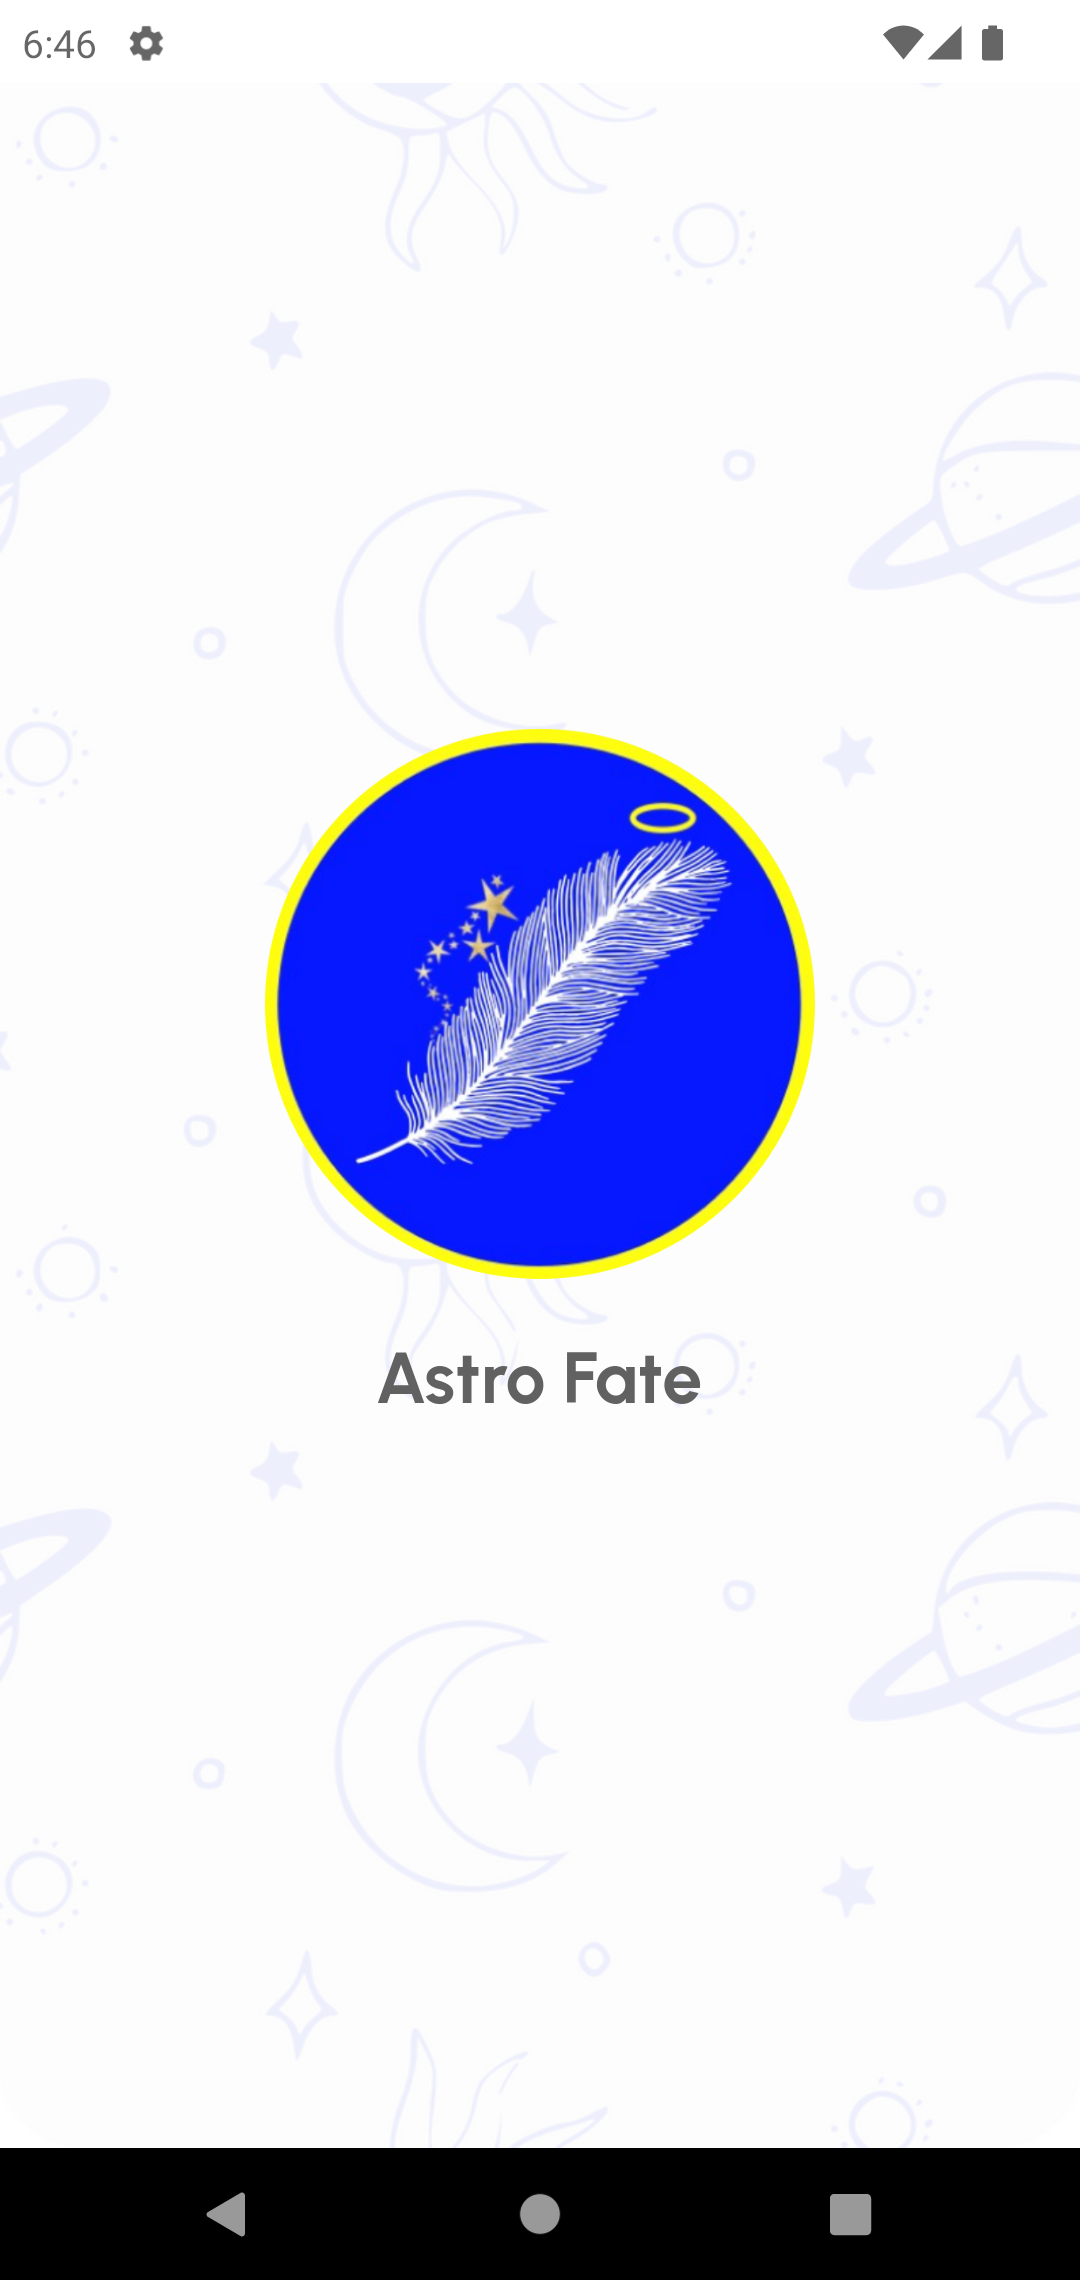 Astrology app astro fate 